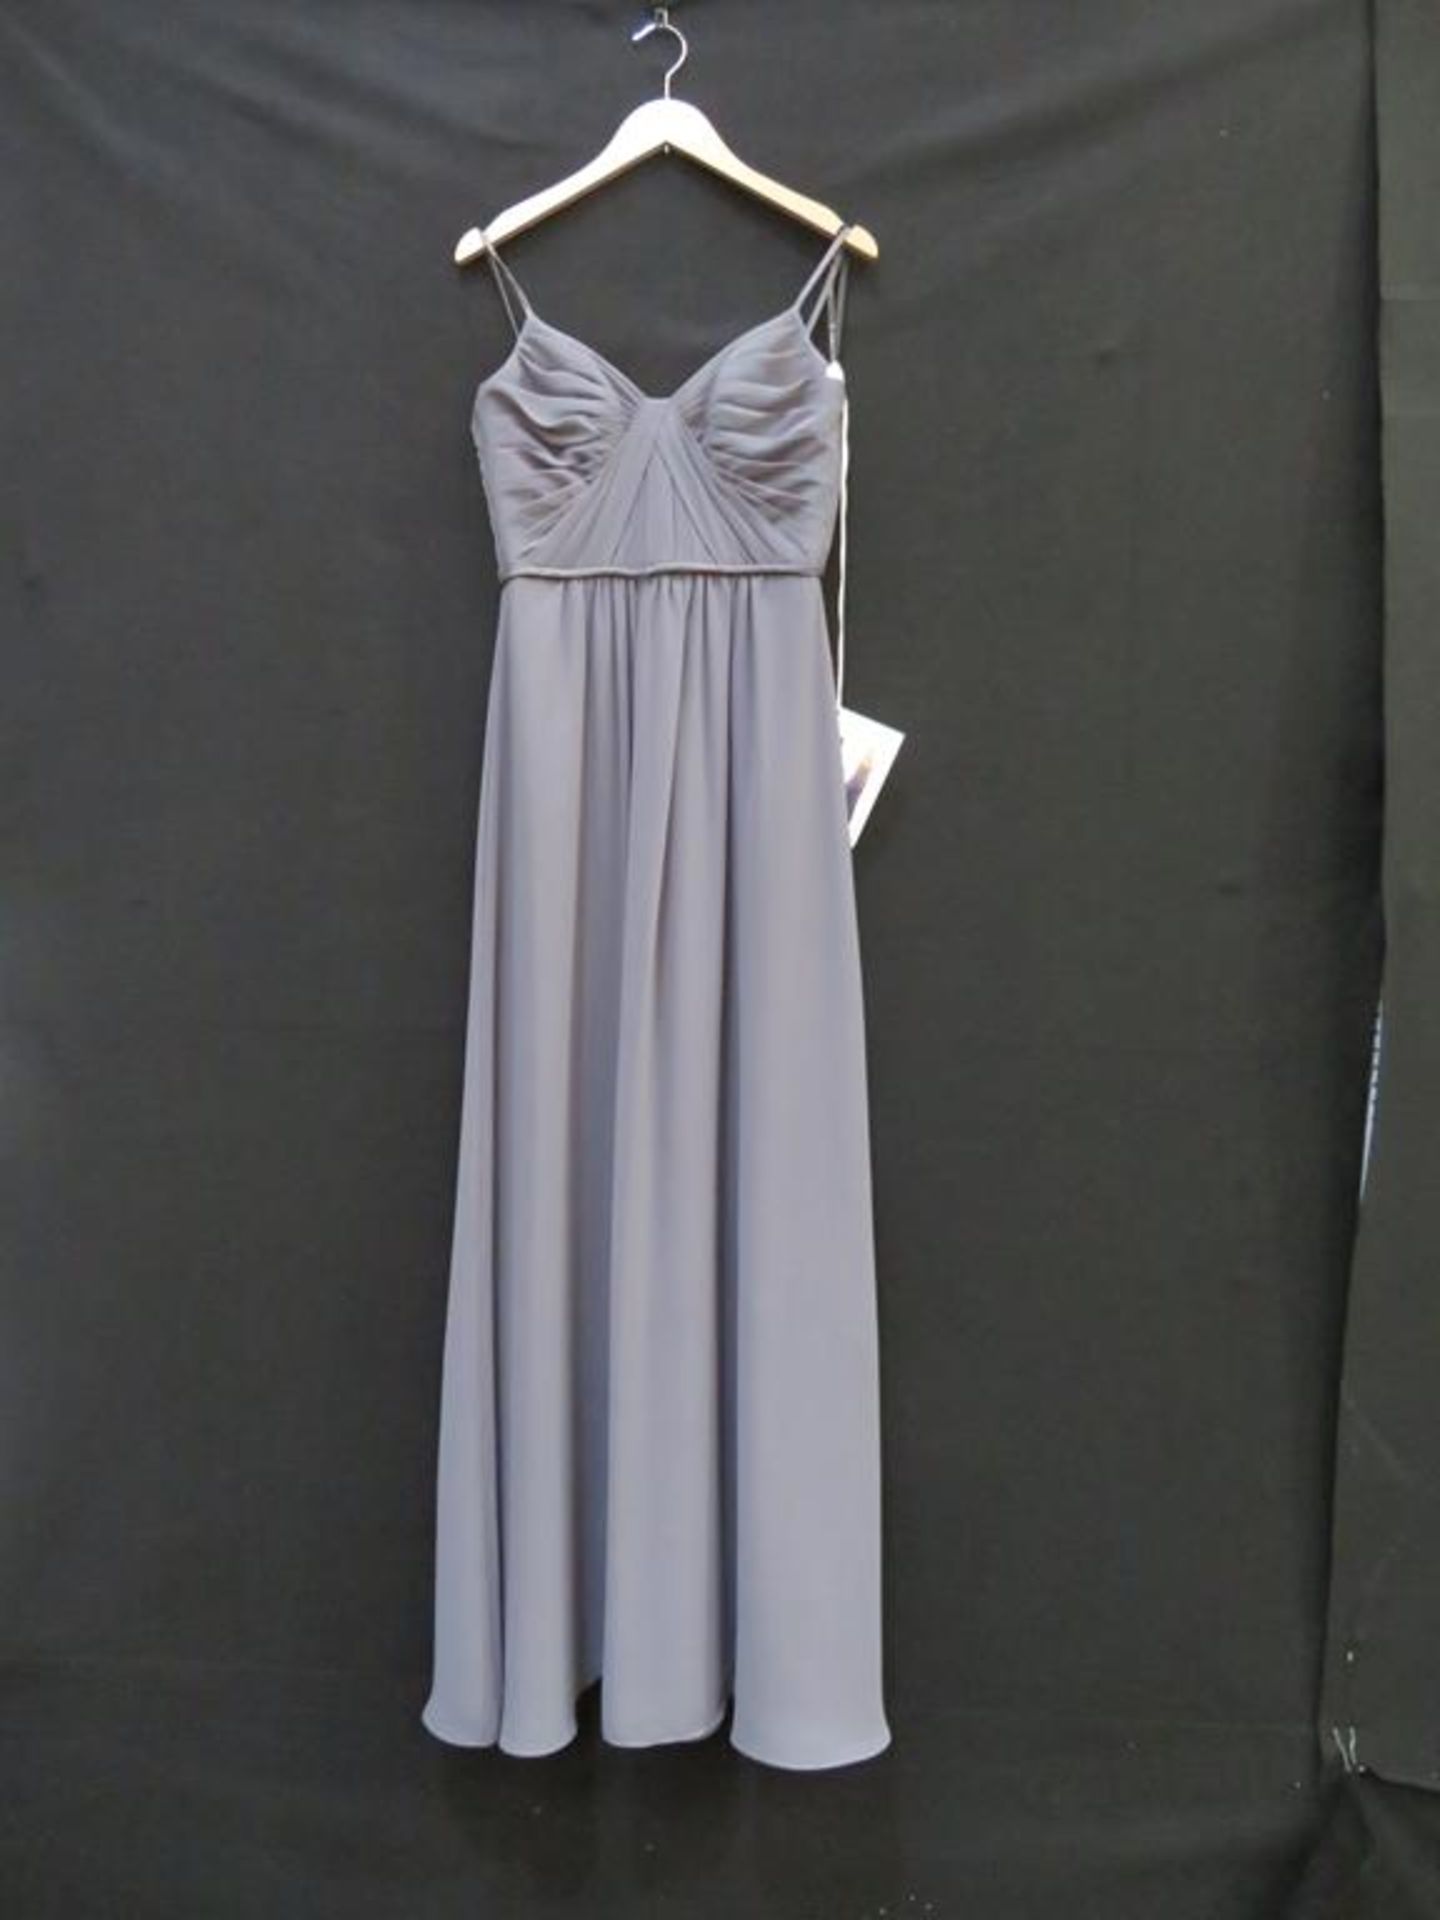 Five 'Charcoal/Pewter' Bridal Gowns in various styles - Image 6 of 29